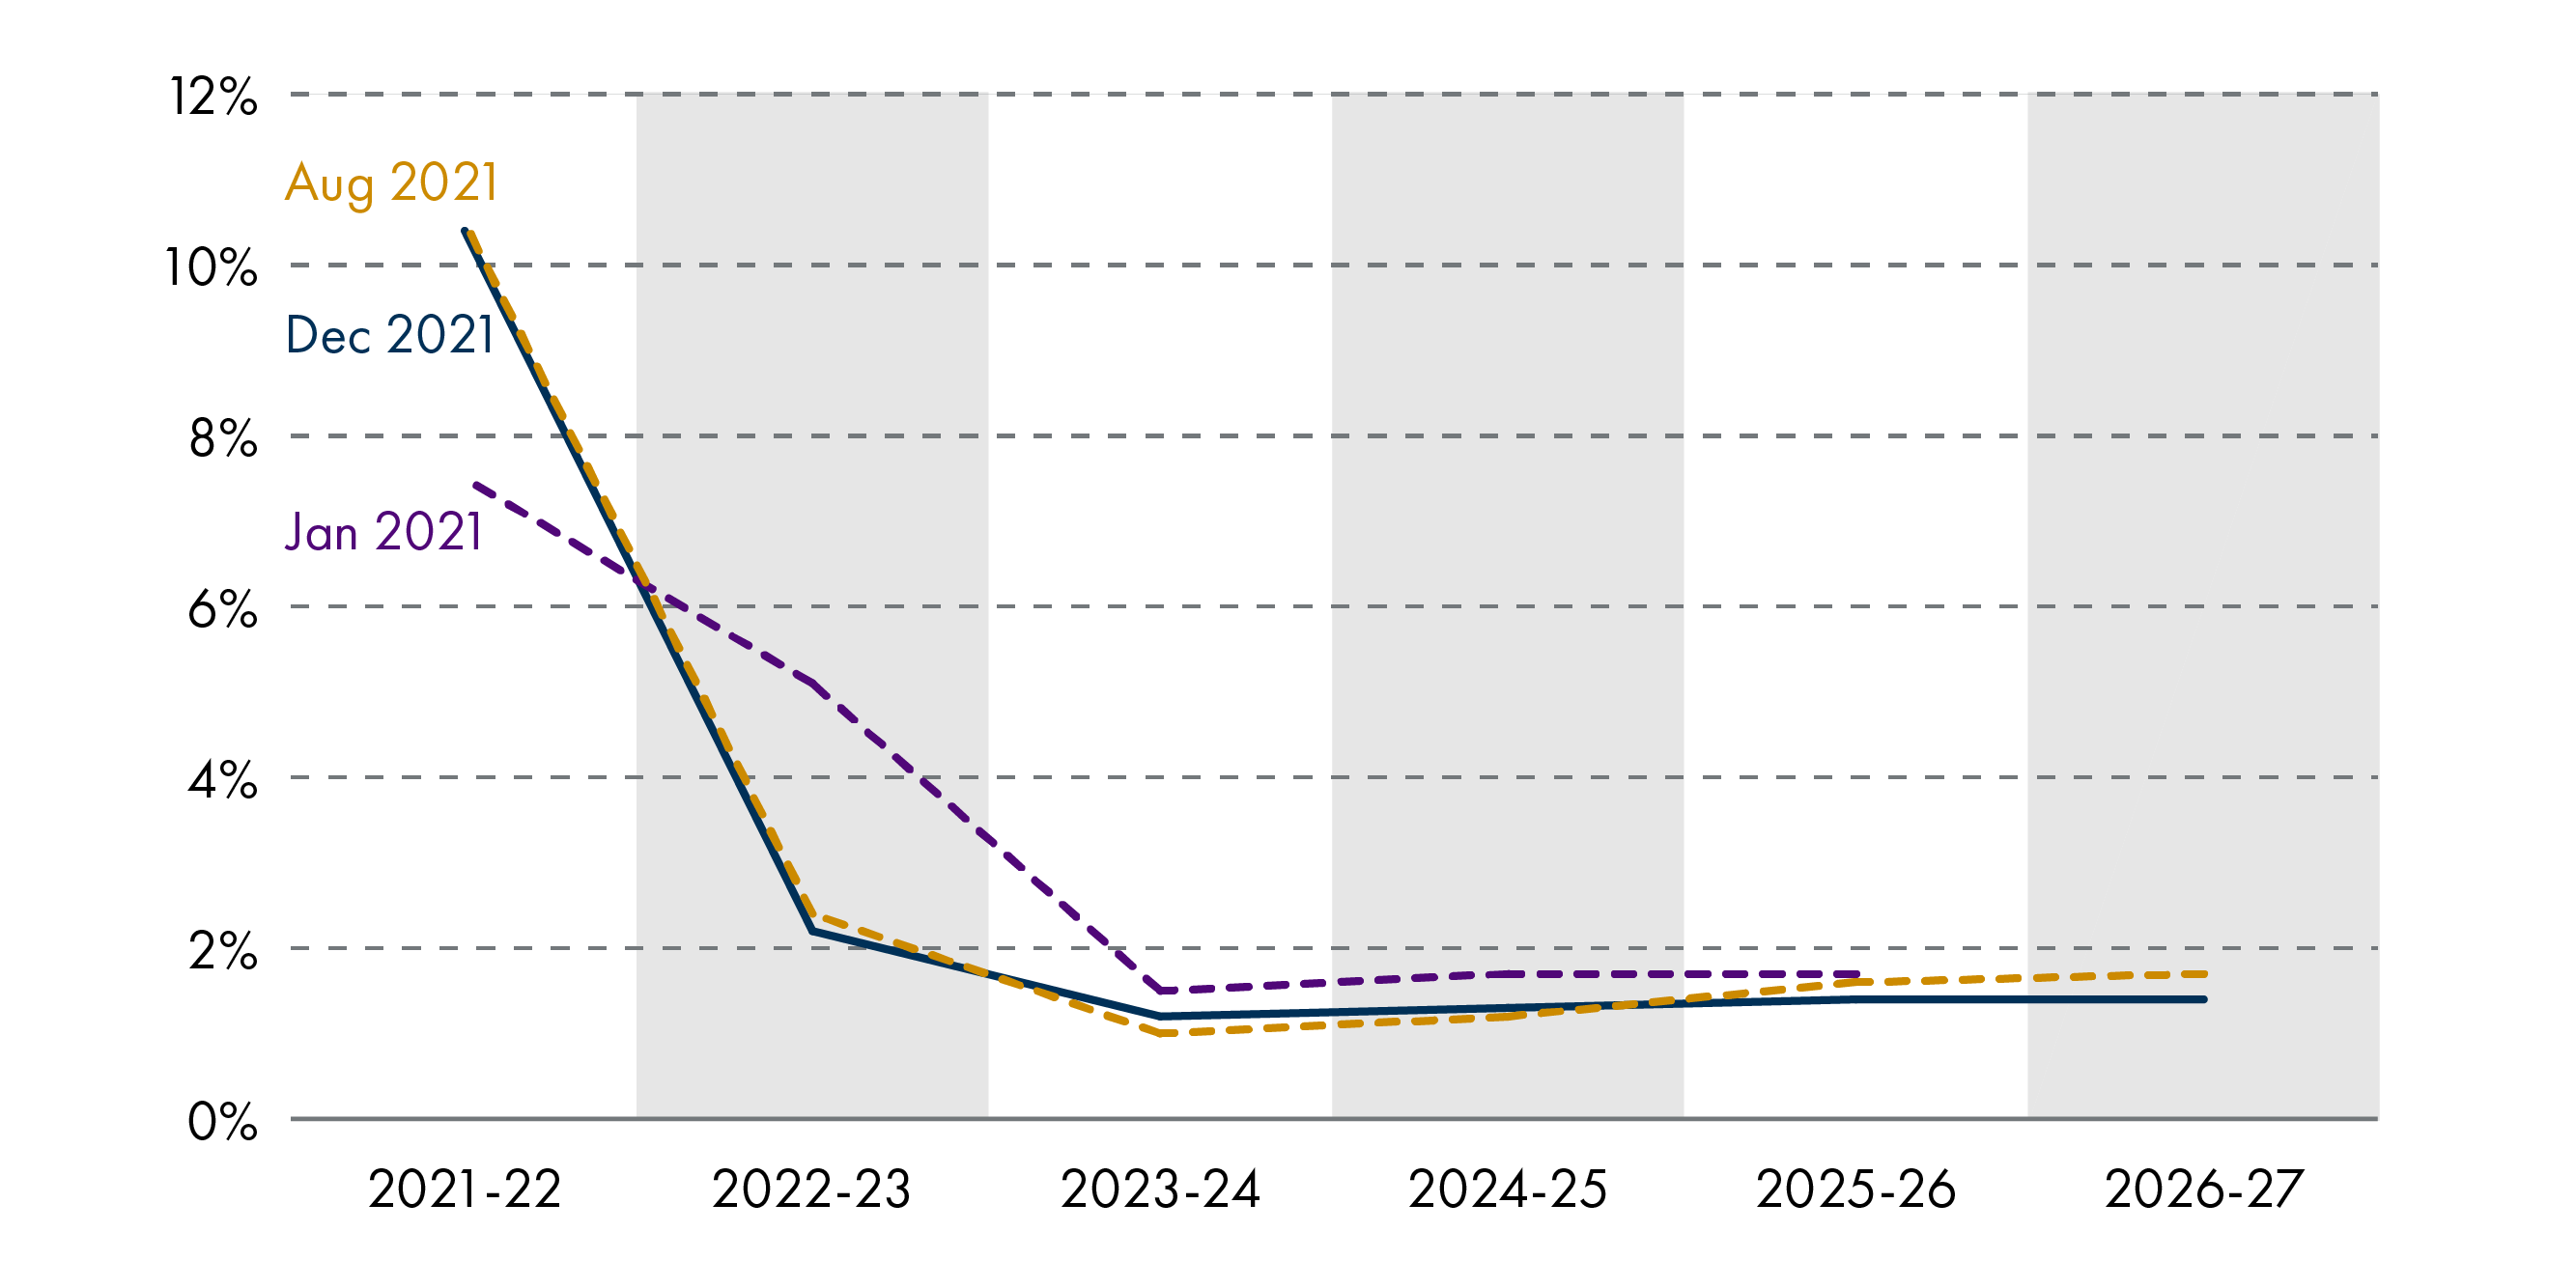 The SFC expects Scottish GDP to grow by 10.4 per cent in 2021-22, in line with its most recent estimate in August 2021, as shown in Figure 7. However, longer term GDP growth rates for 2025-26 have been adjusted down by the SFC, relative to the August 2021 and January 2021 forecasts.